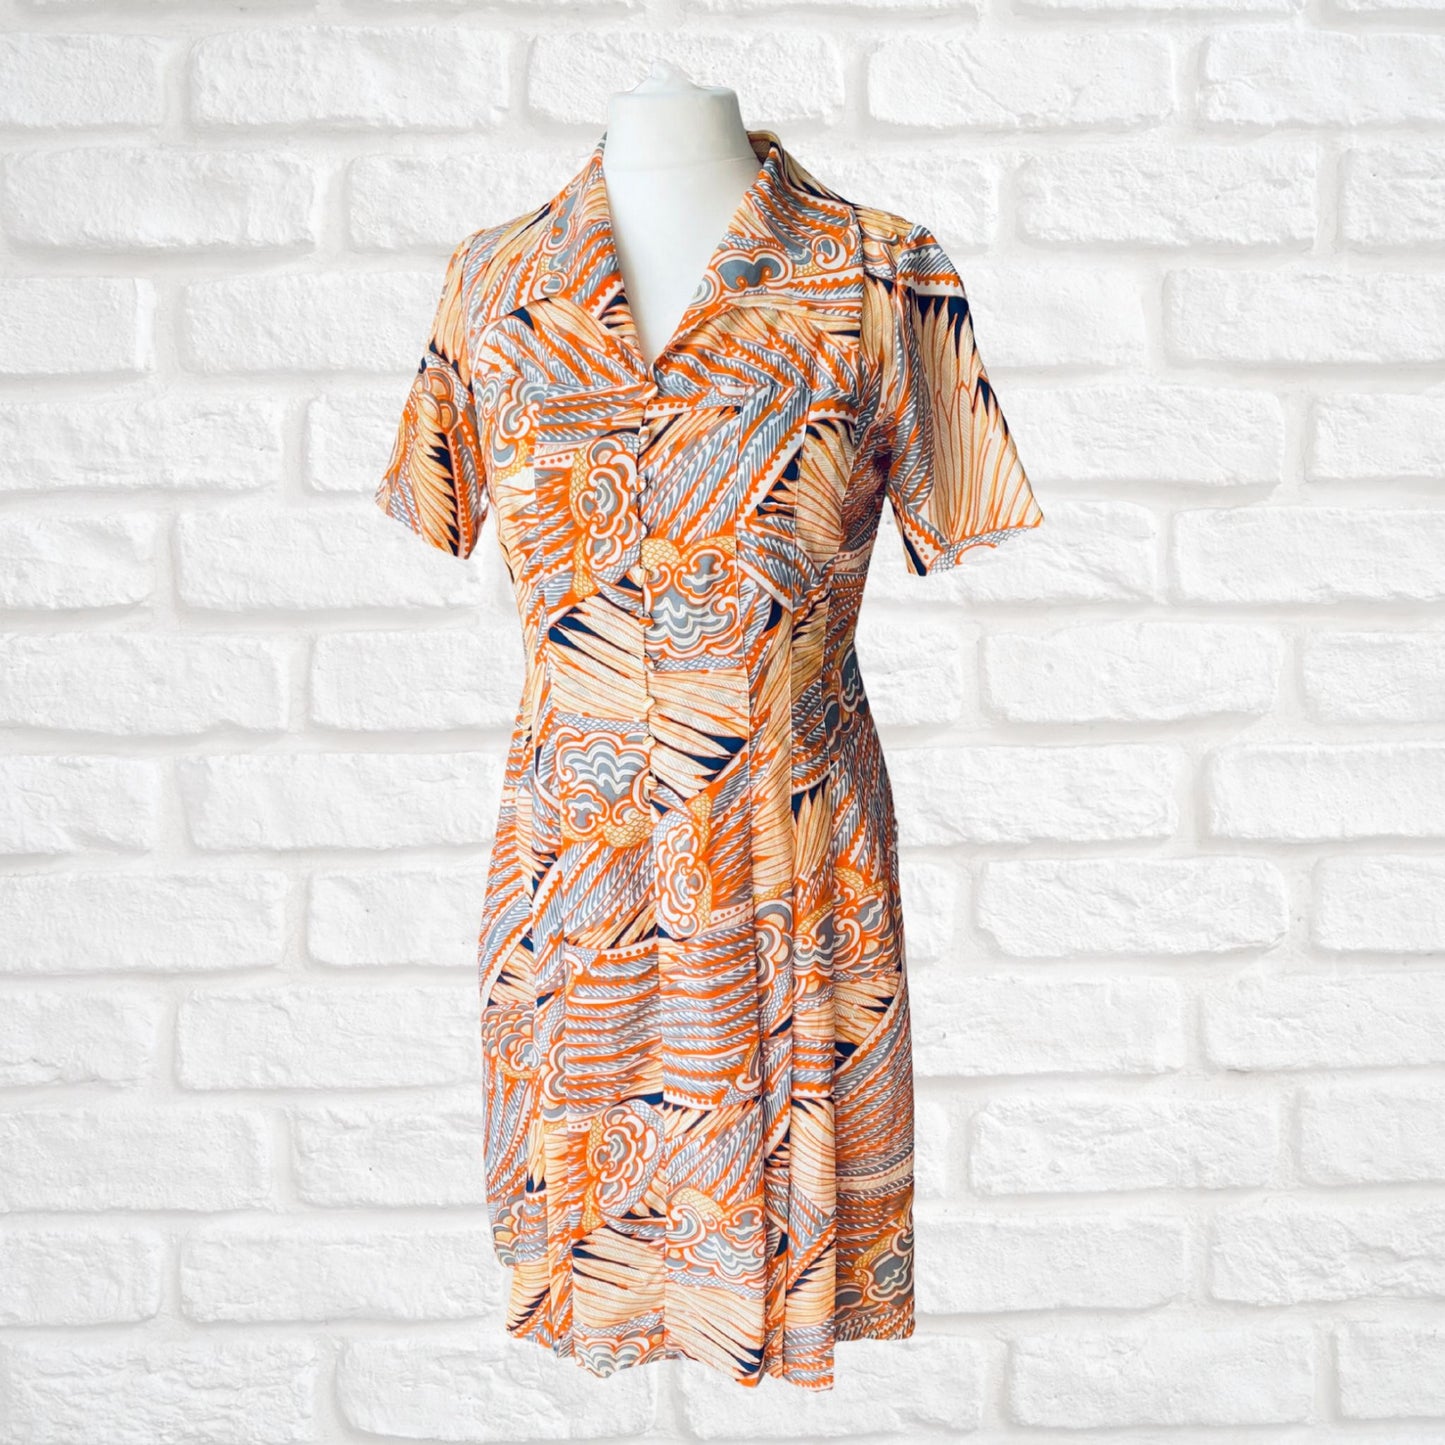 1970s Orange, Grey, and White Abstract Print Midi Dress - Vintage Shirt Waister Style. Approx UK size 14-16